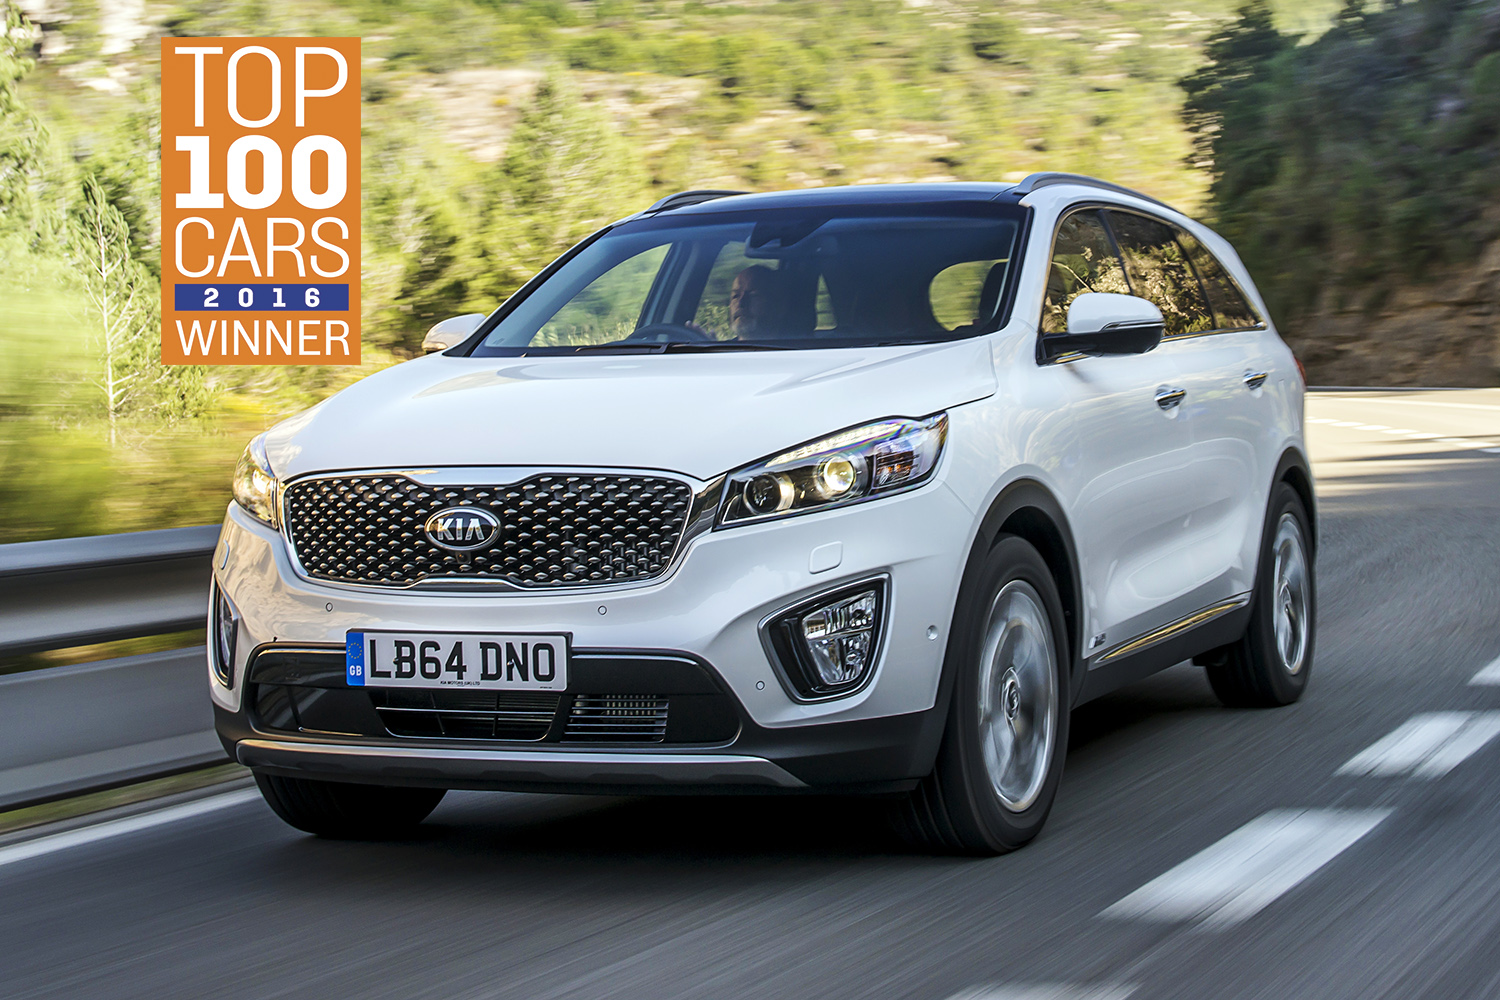 Kia Sorento: The Sunday Times Top 100 Cars 2016 Best Large Crossover